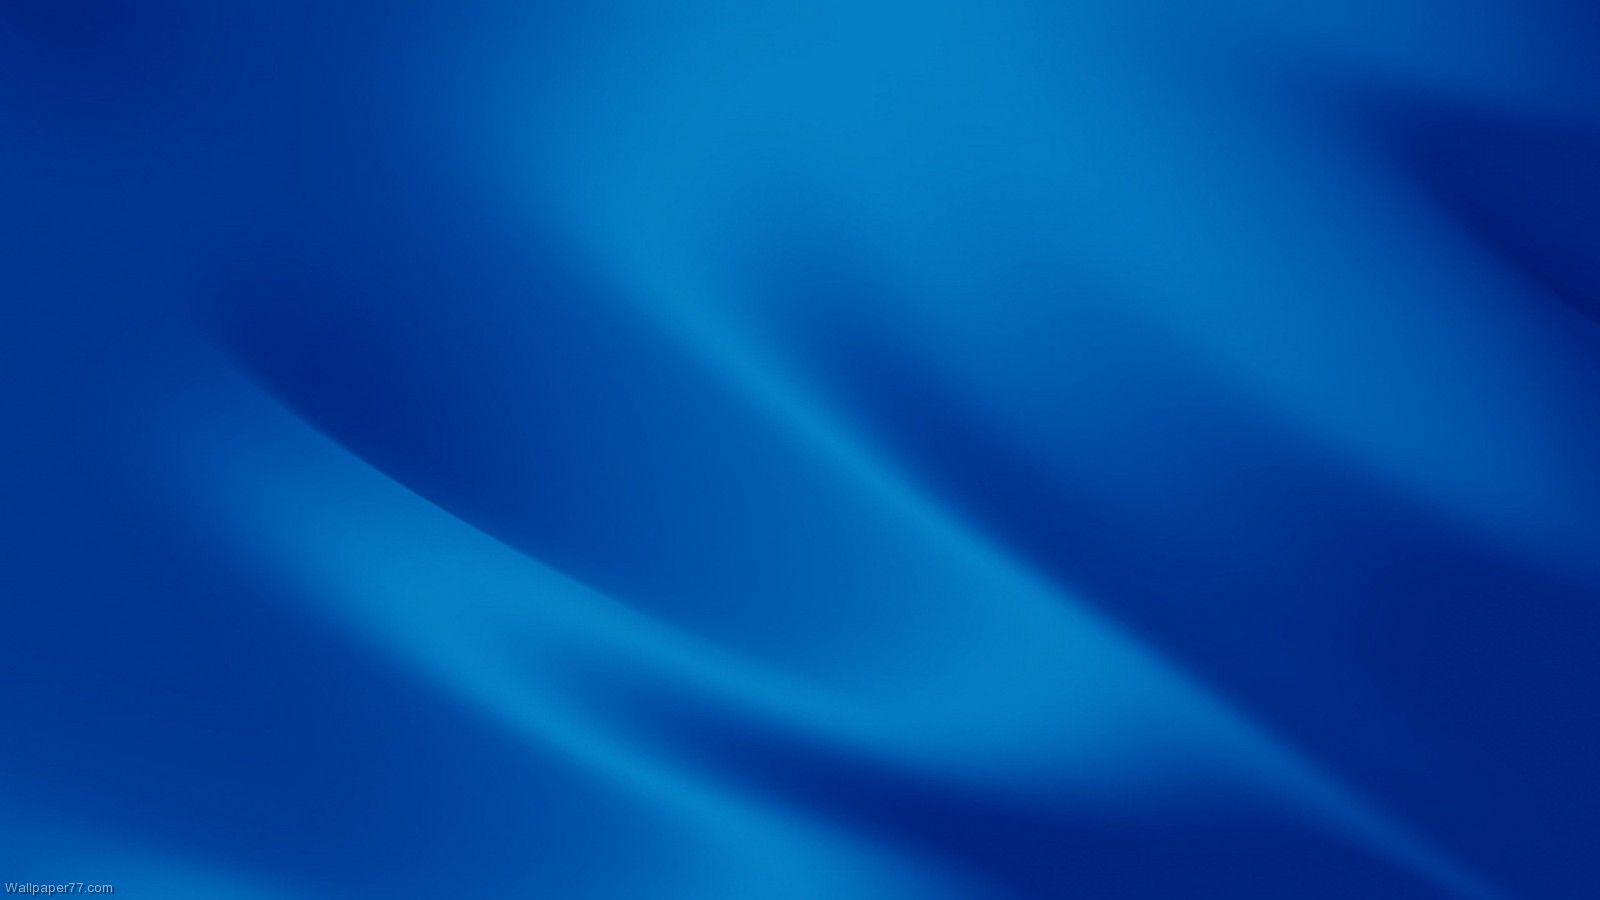 Wallpapers For > Abstract Dark Blue Wallpapers